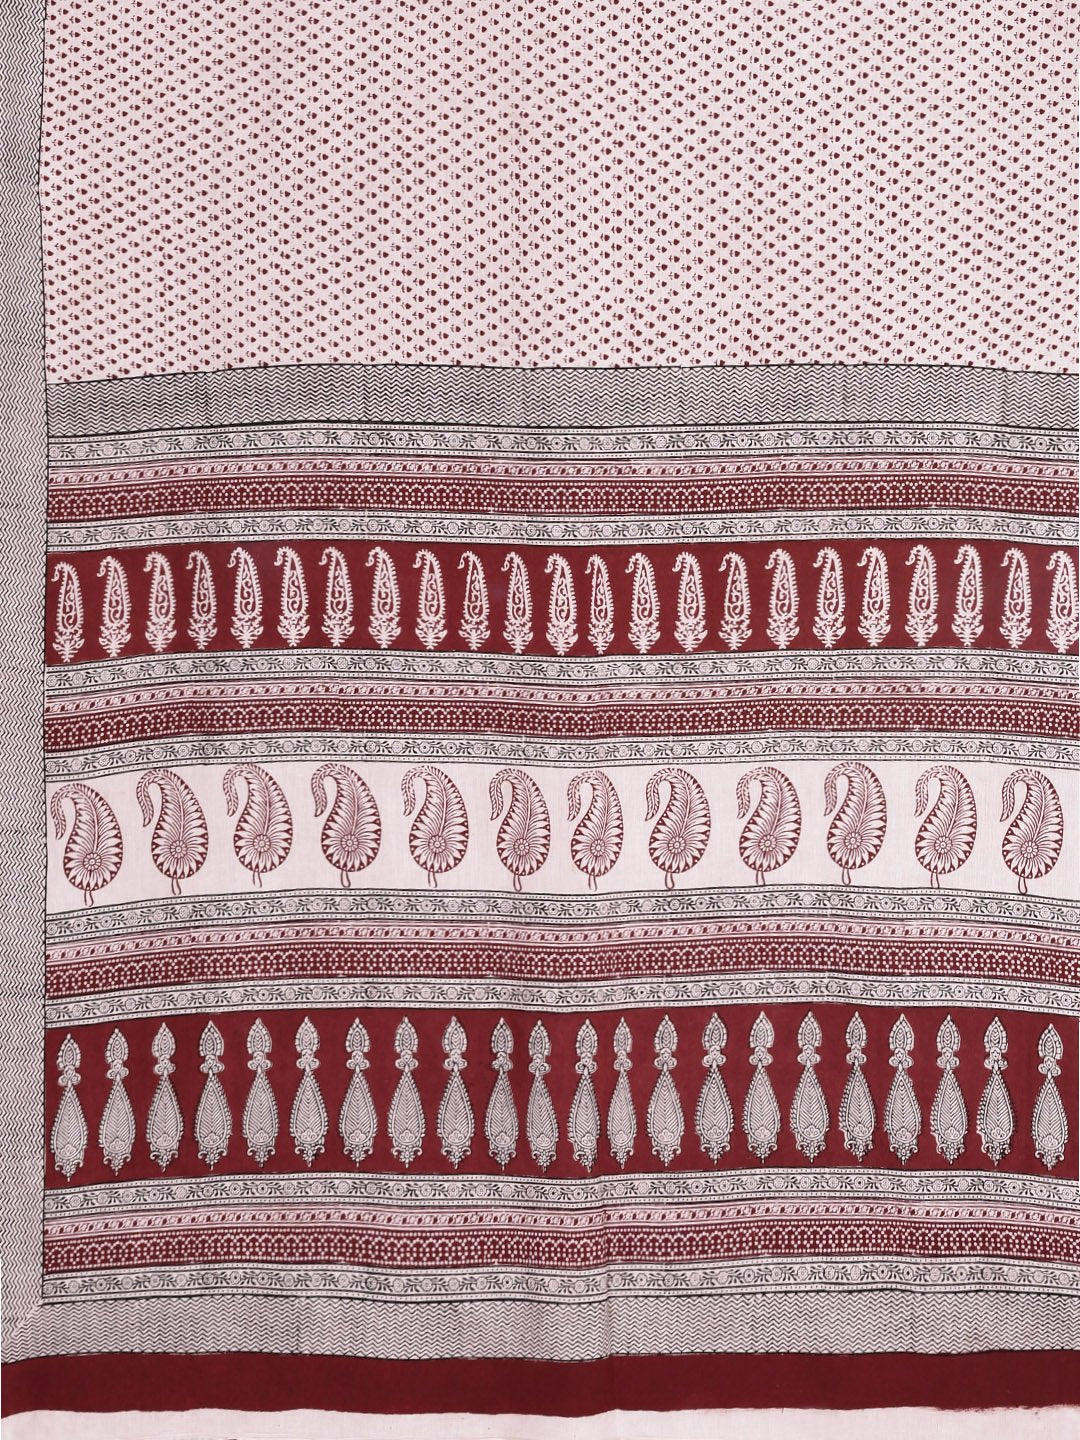 Peach-Coloured Maroon Pure Cotton Printed Saree-Saree-Kalakari India-MYBASA0024-Bagh, Cotton, Geographical Indication, Hand Blocks, Hand Crafted, Heritage Prints, Natural Dyes, Sarees, Sustainable Fabrics-[Linen,Ethnic,wear,Fashionista,Handloom,Handicraft,Indigo,blockprint,block,print,Cotton,Chanderi,Blue, latest,classy,party,bollywood,trendy,summer,style,traditional,formal,elegant,unique,style,hand,block,print, dabu,booti,gift,present,glamorous,affordable,collectible,Sari,Saree,printed, holi, D